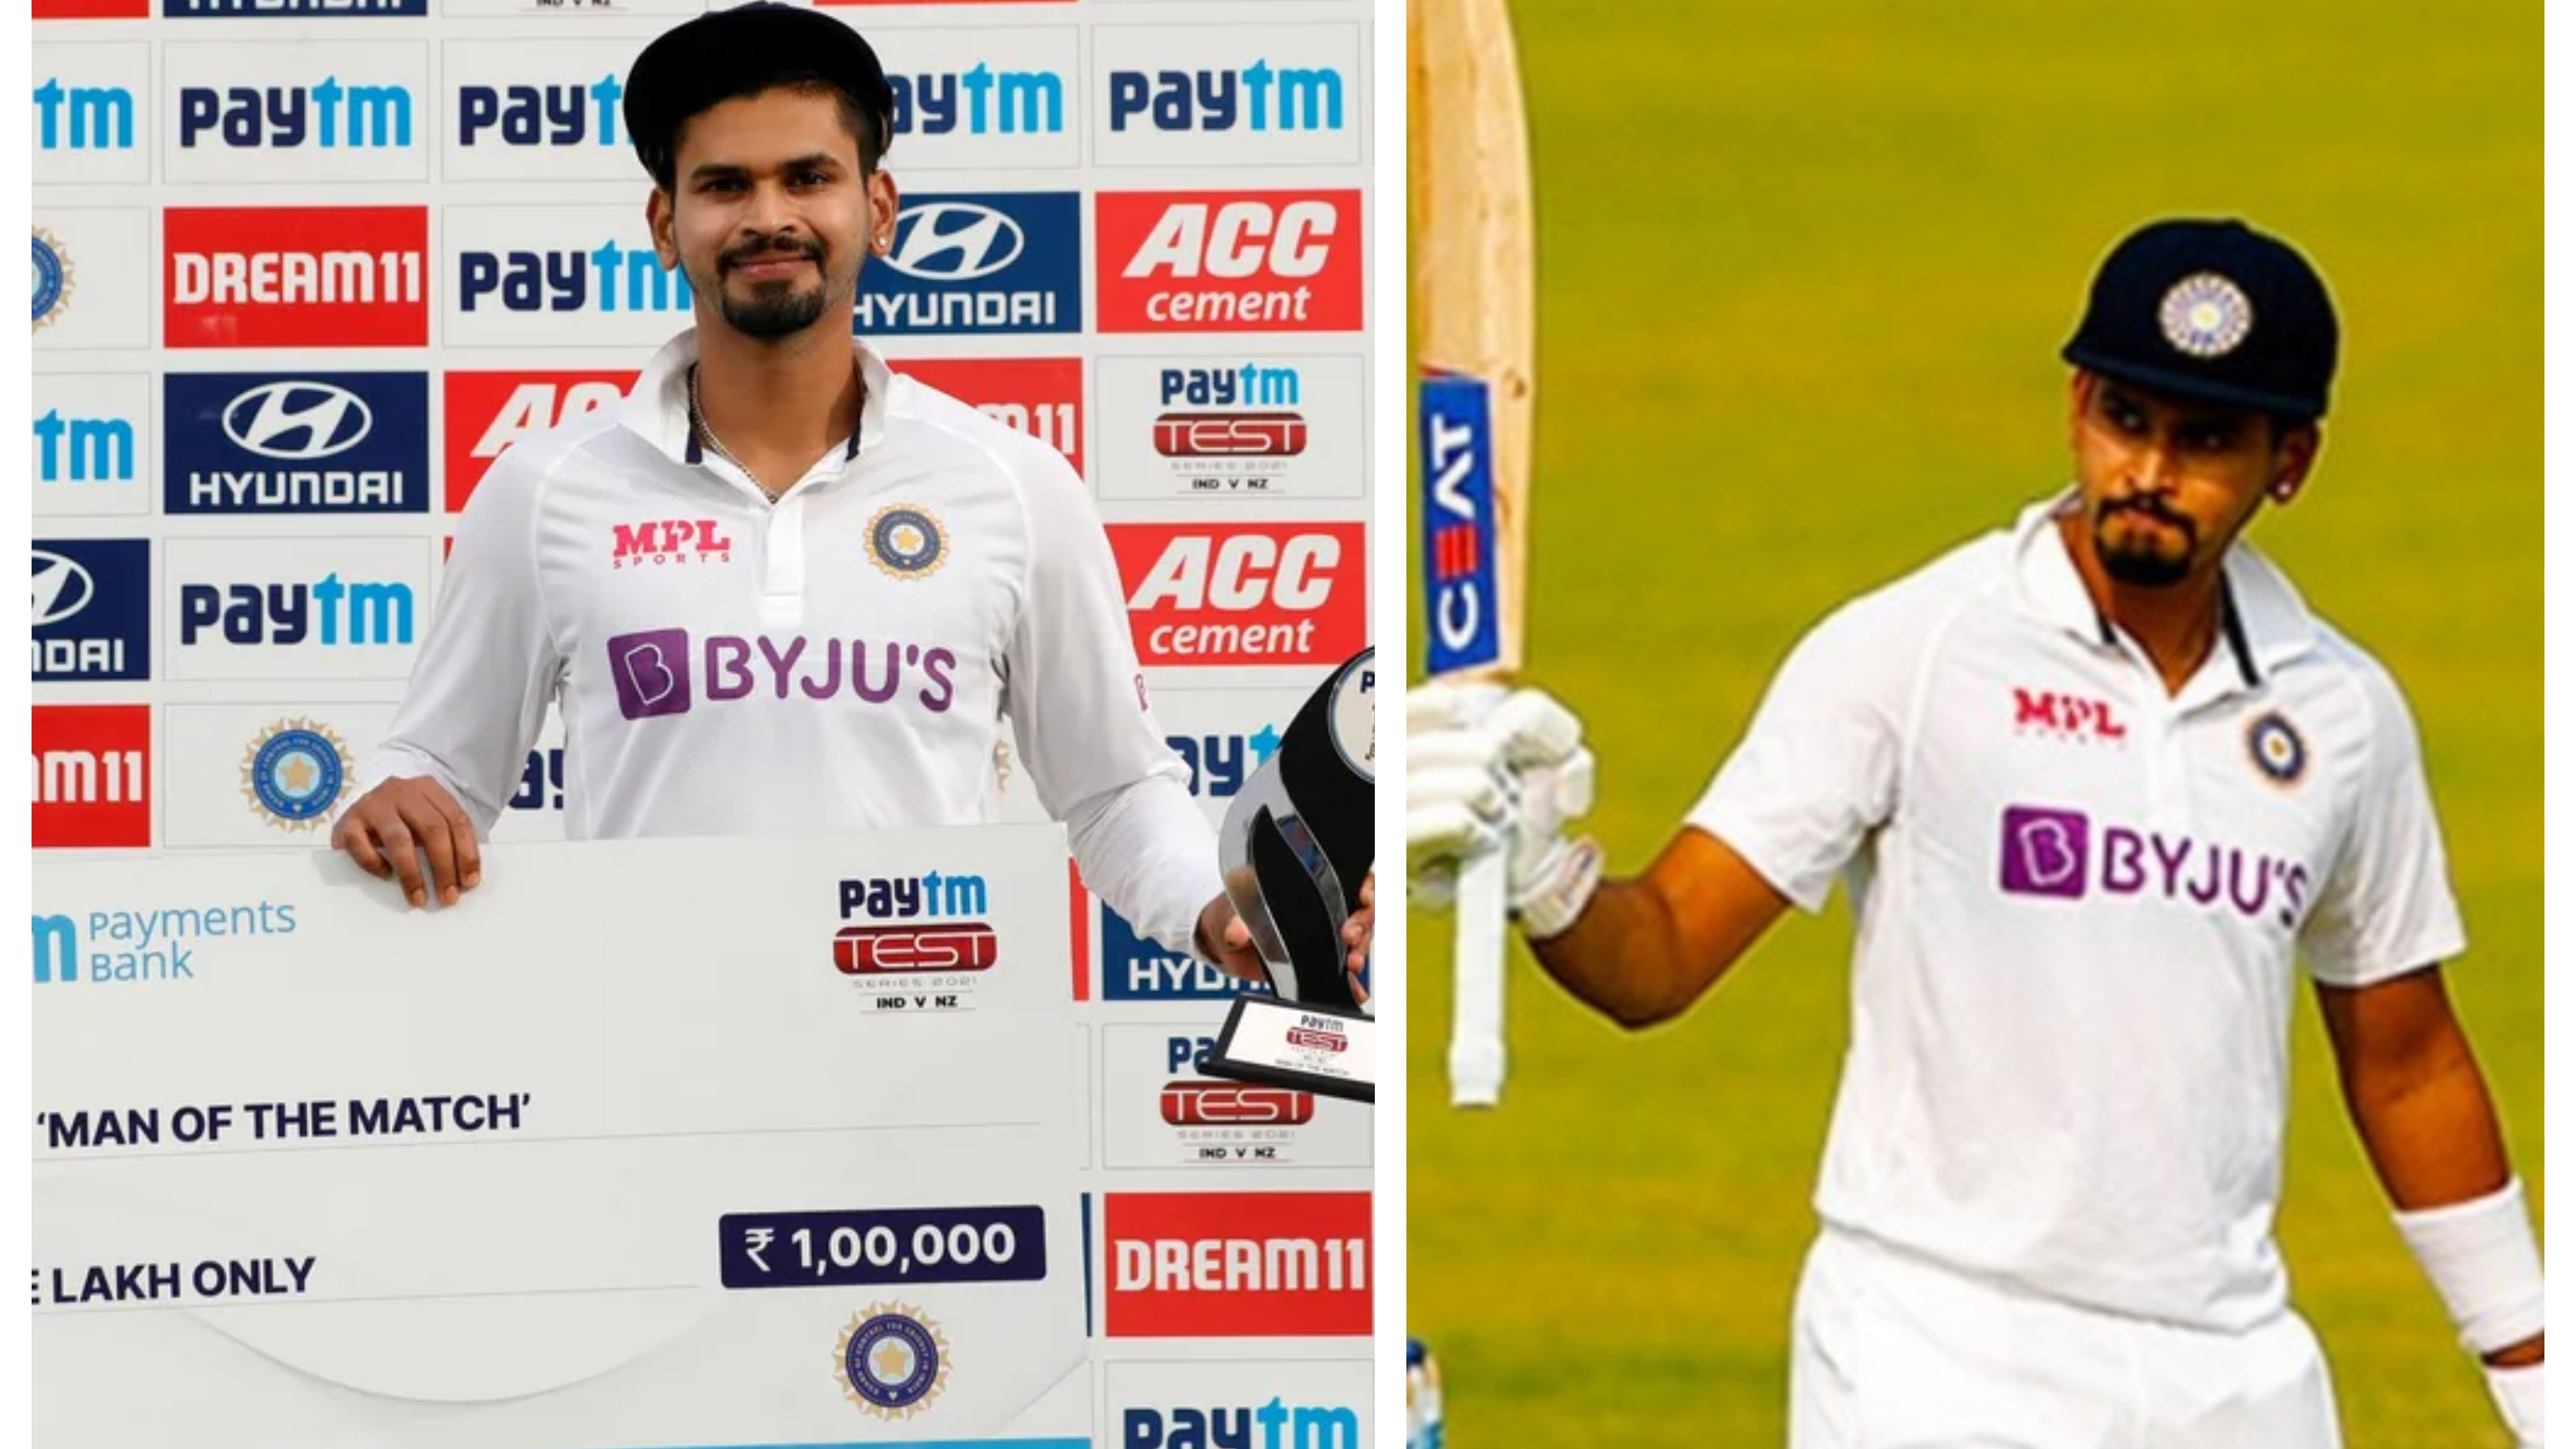 IND v NZ 2021: ‘Win would have been icing on cake’, says Shreyas Iyer after stunning display on Test debut